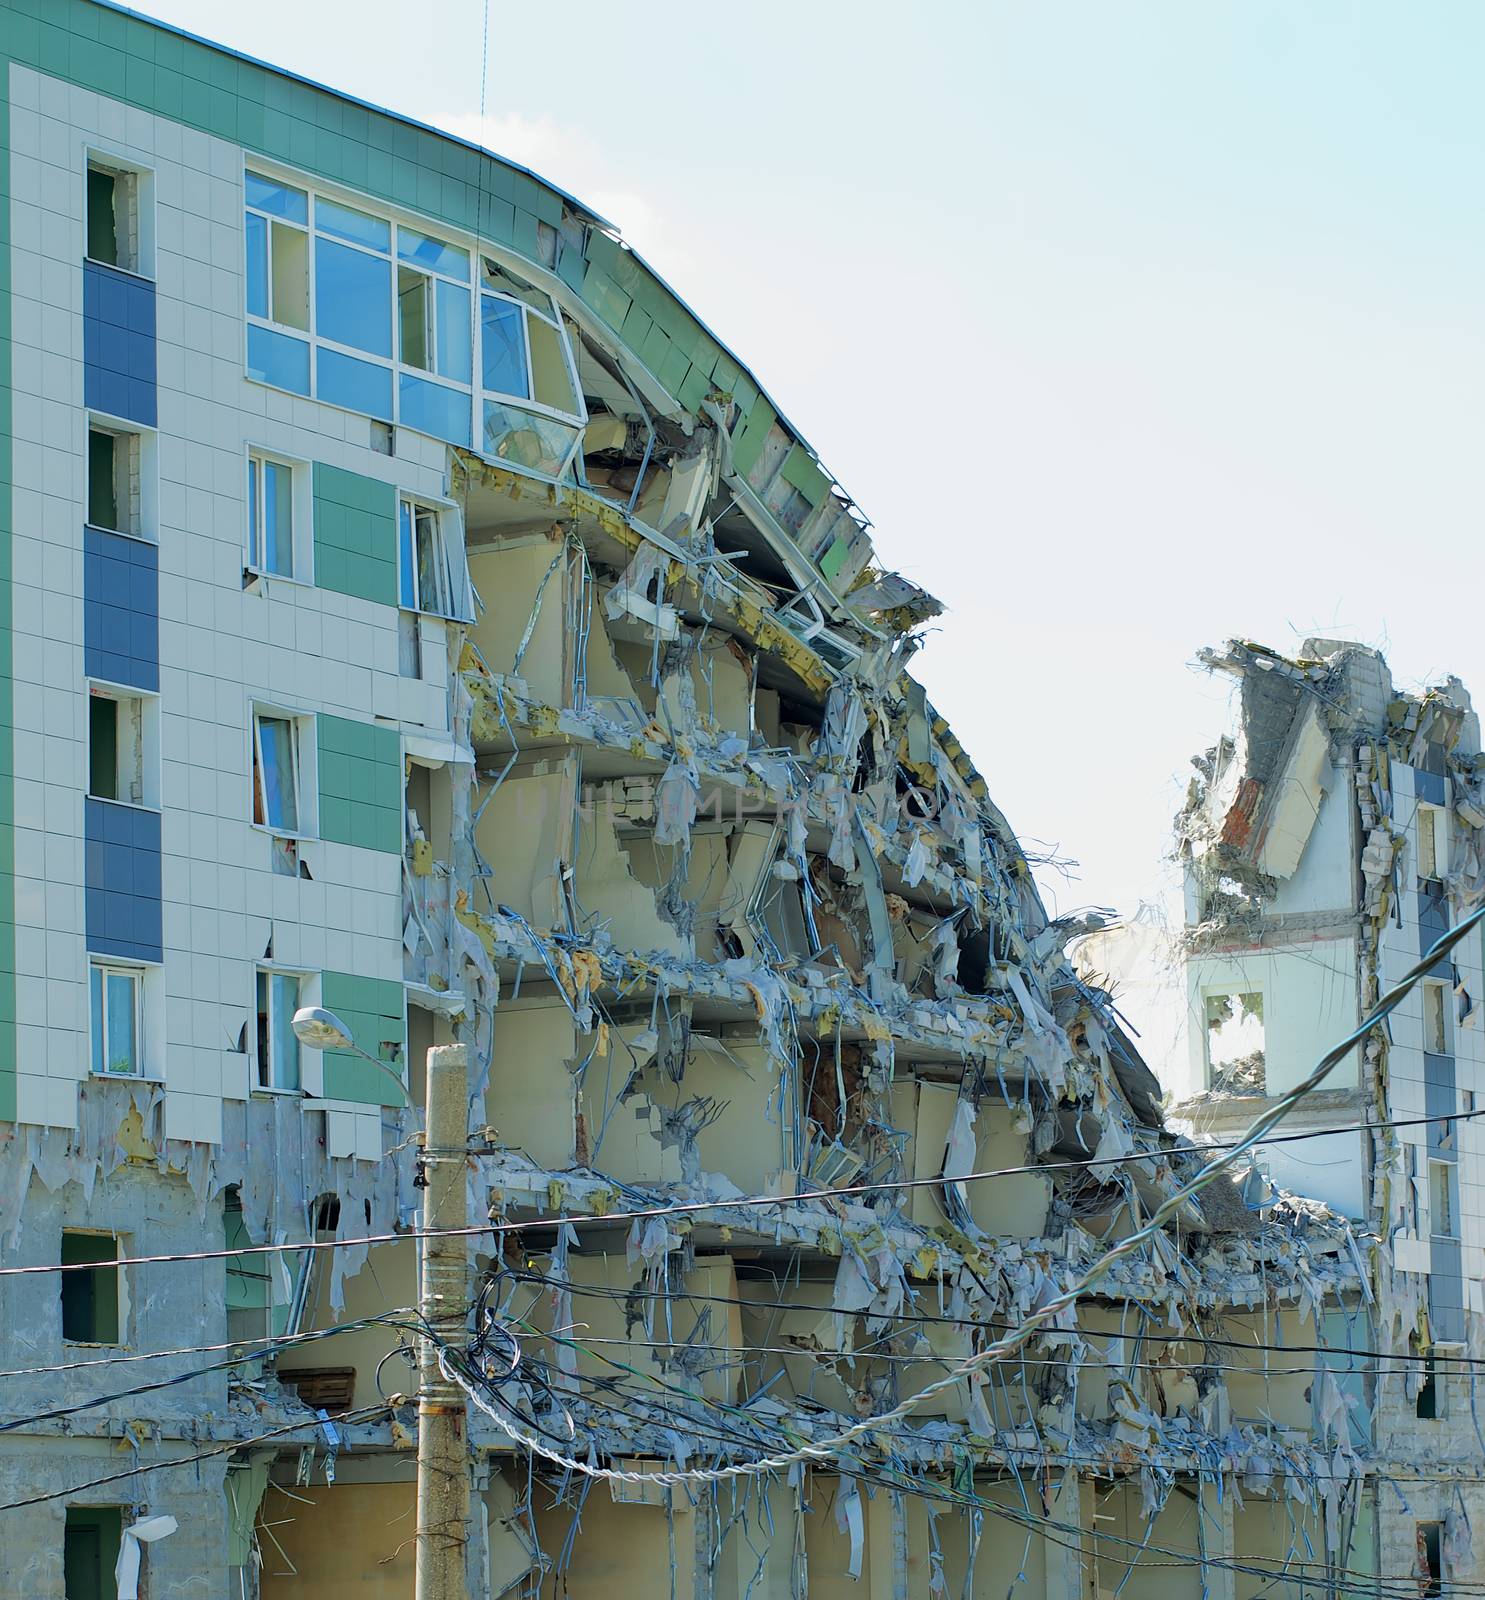 Destroyed Modern Building with Plastic Windows, Electric Cables and Facade Constructions Outdoors